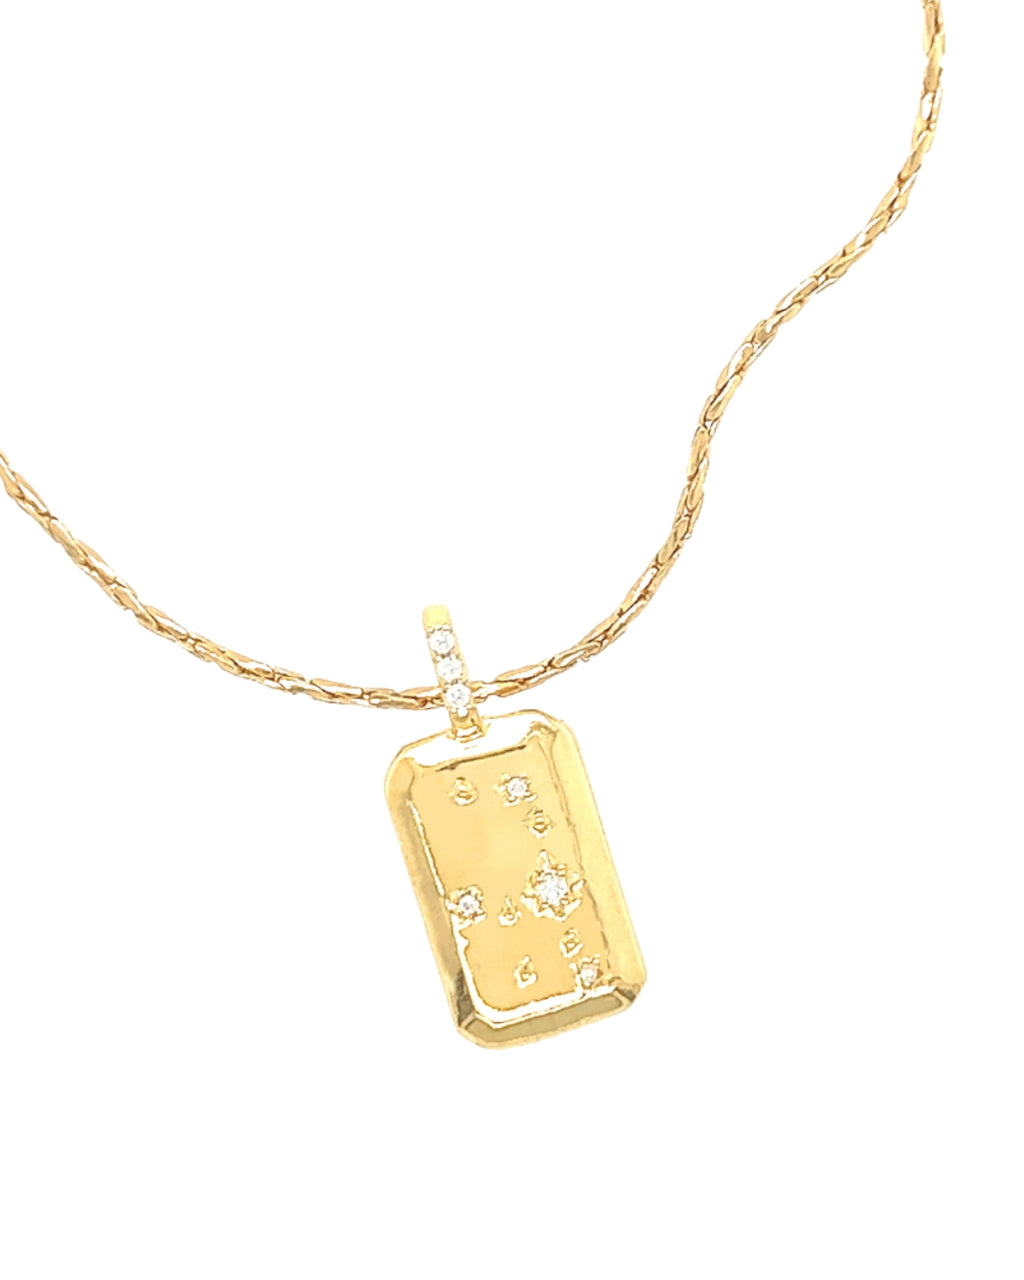 Gold Virgo Constellation Zodiac Pendant on a Gold Necklace Chain